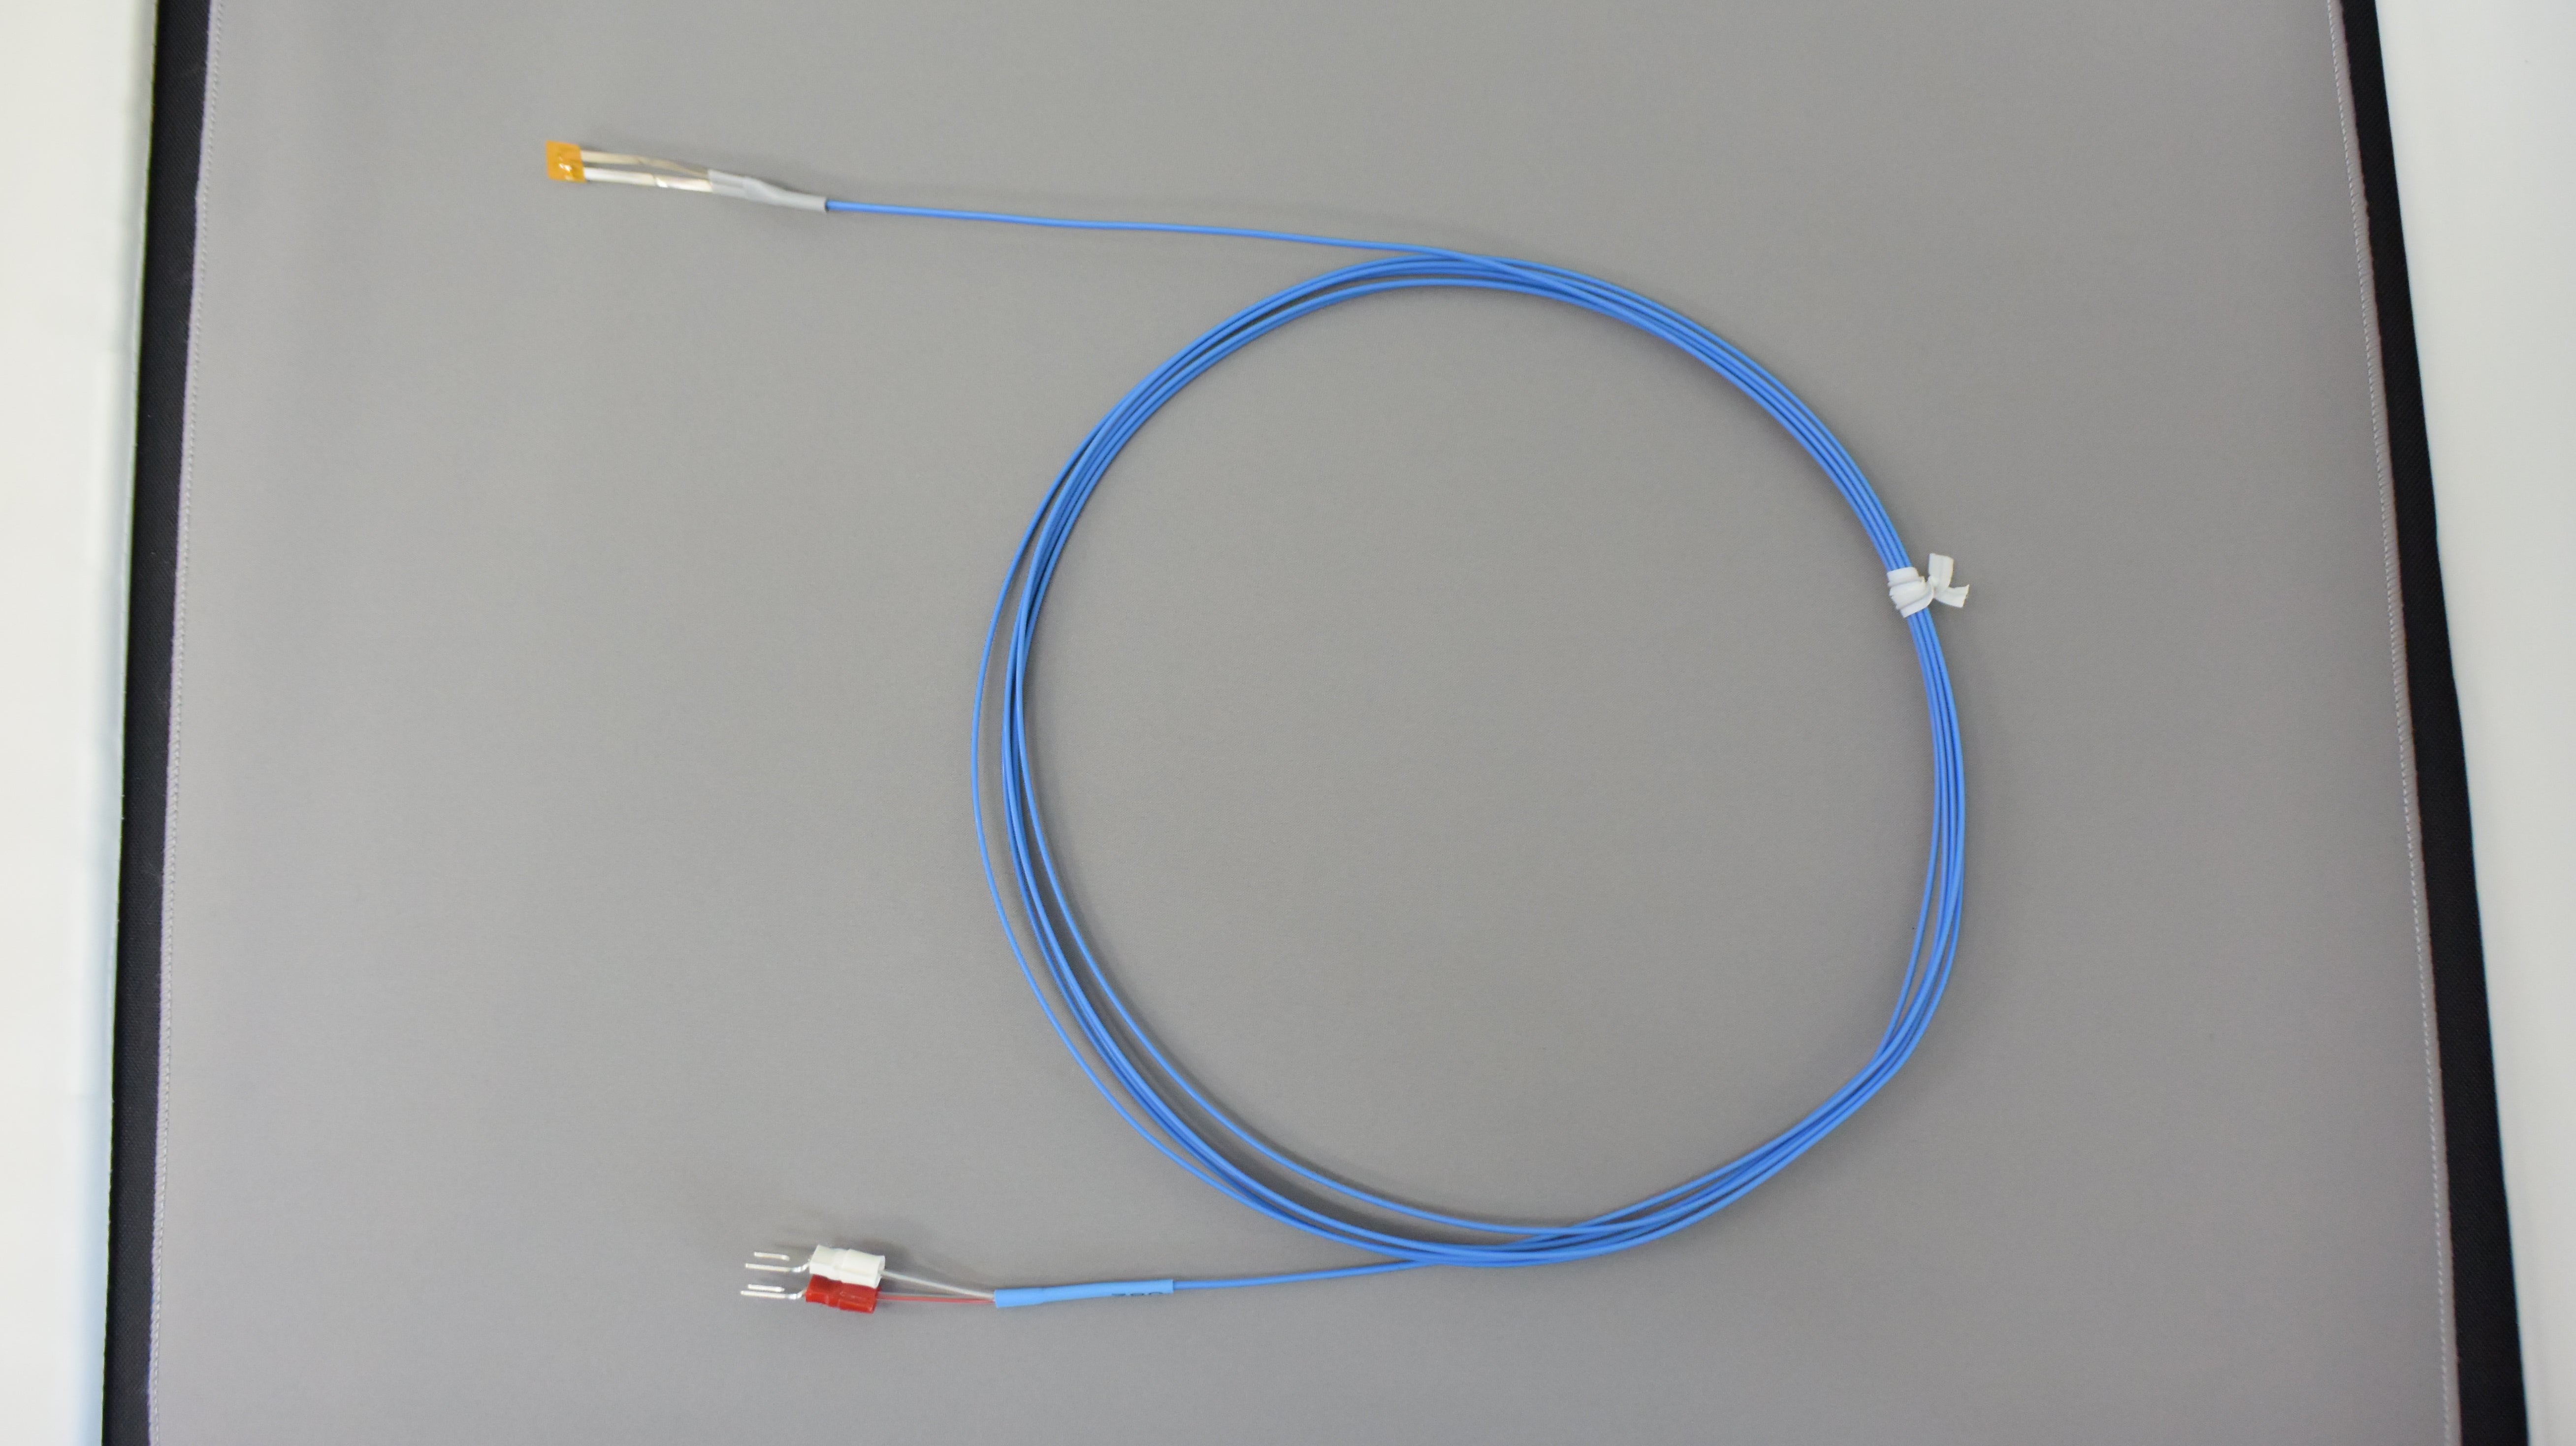 Temperature Sensor with Thermocouple (Type K) "Sheet Type" Max. operating temp: 200°C, Tolerance: Class 2 (±2.5°C or ±0.75%)